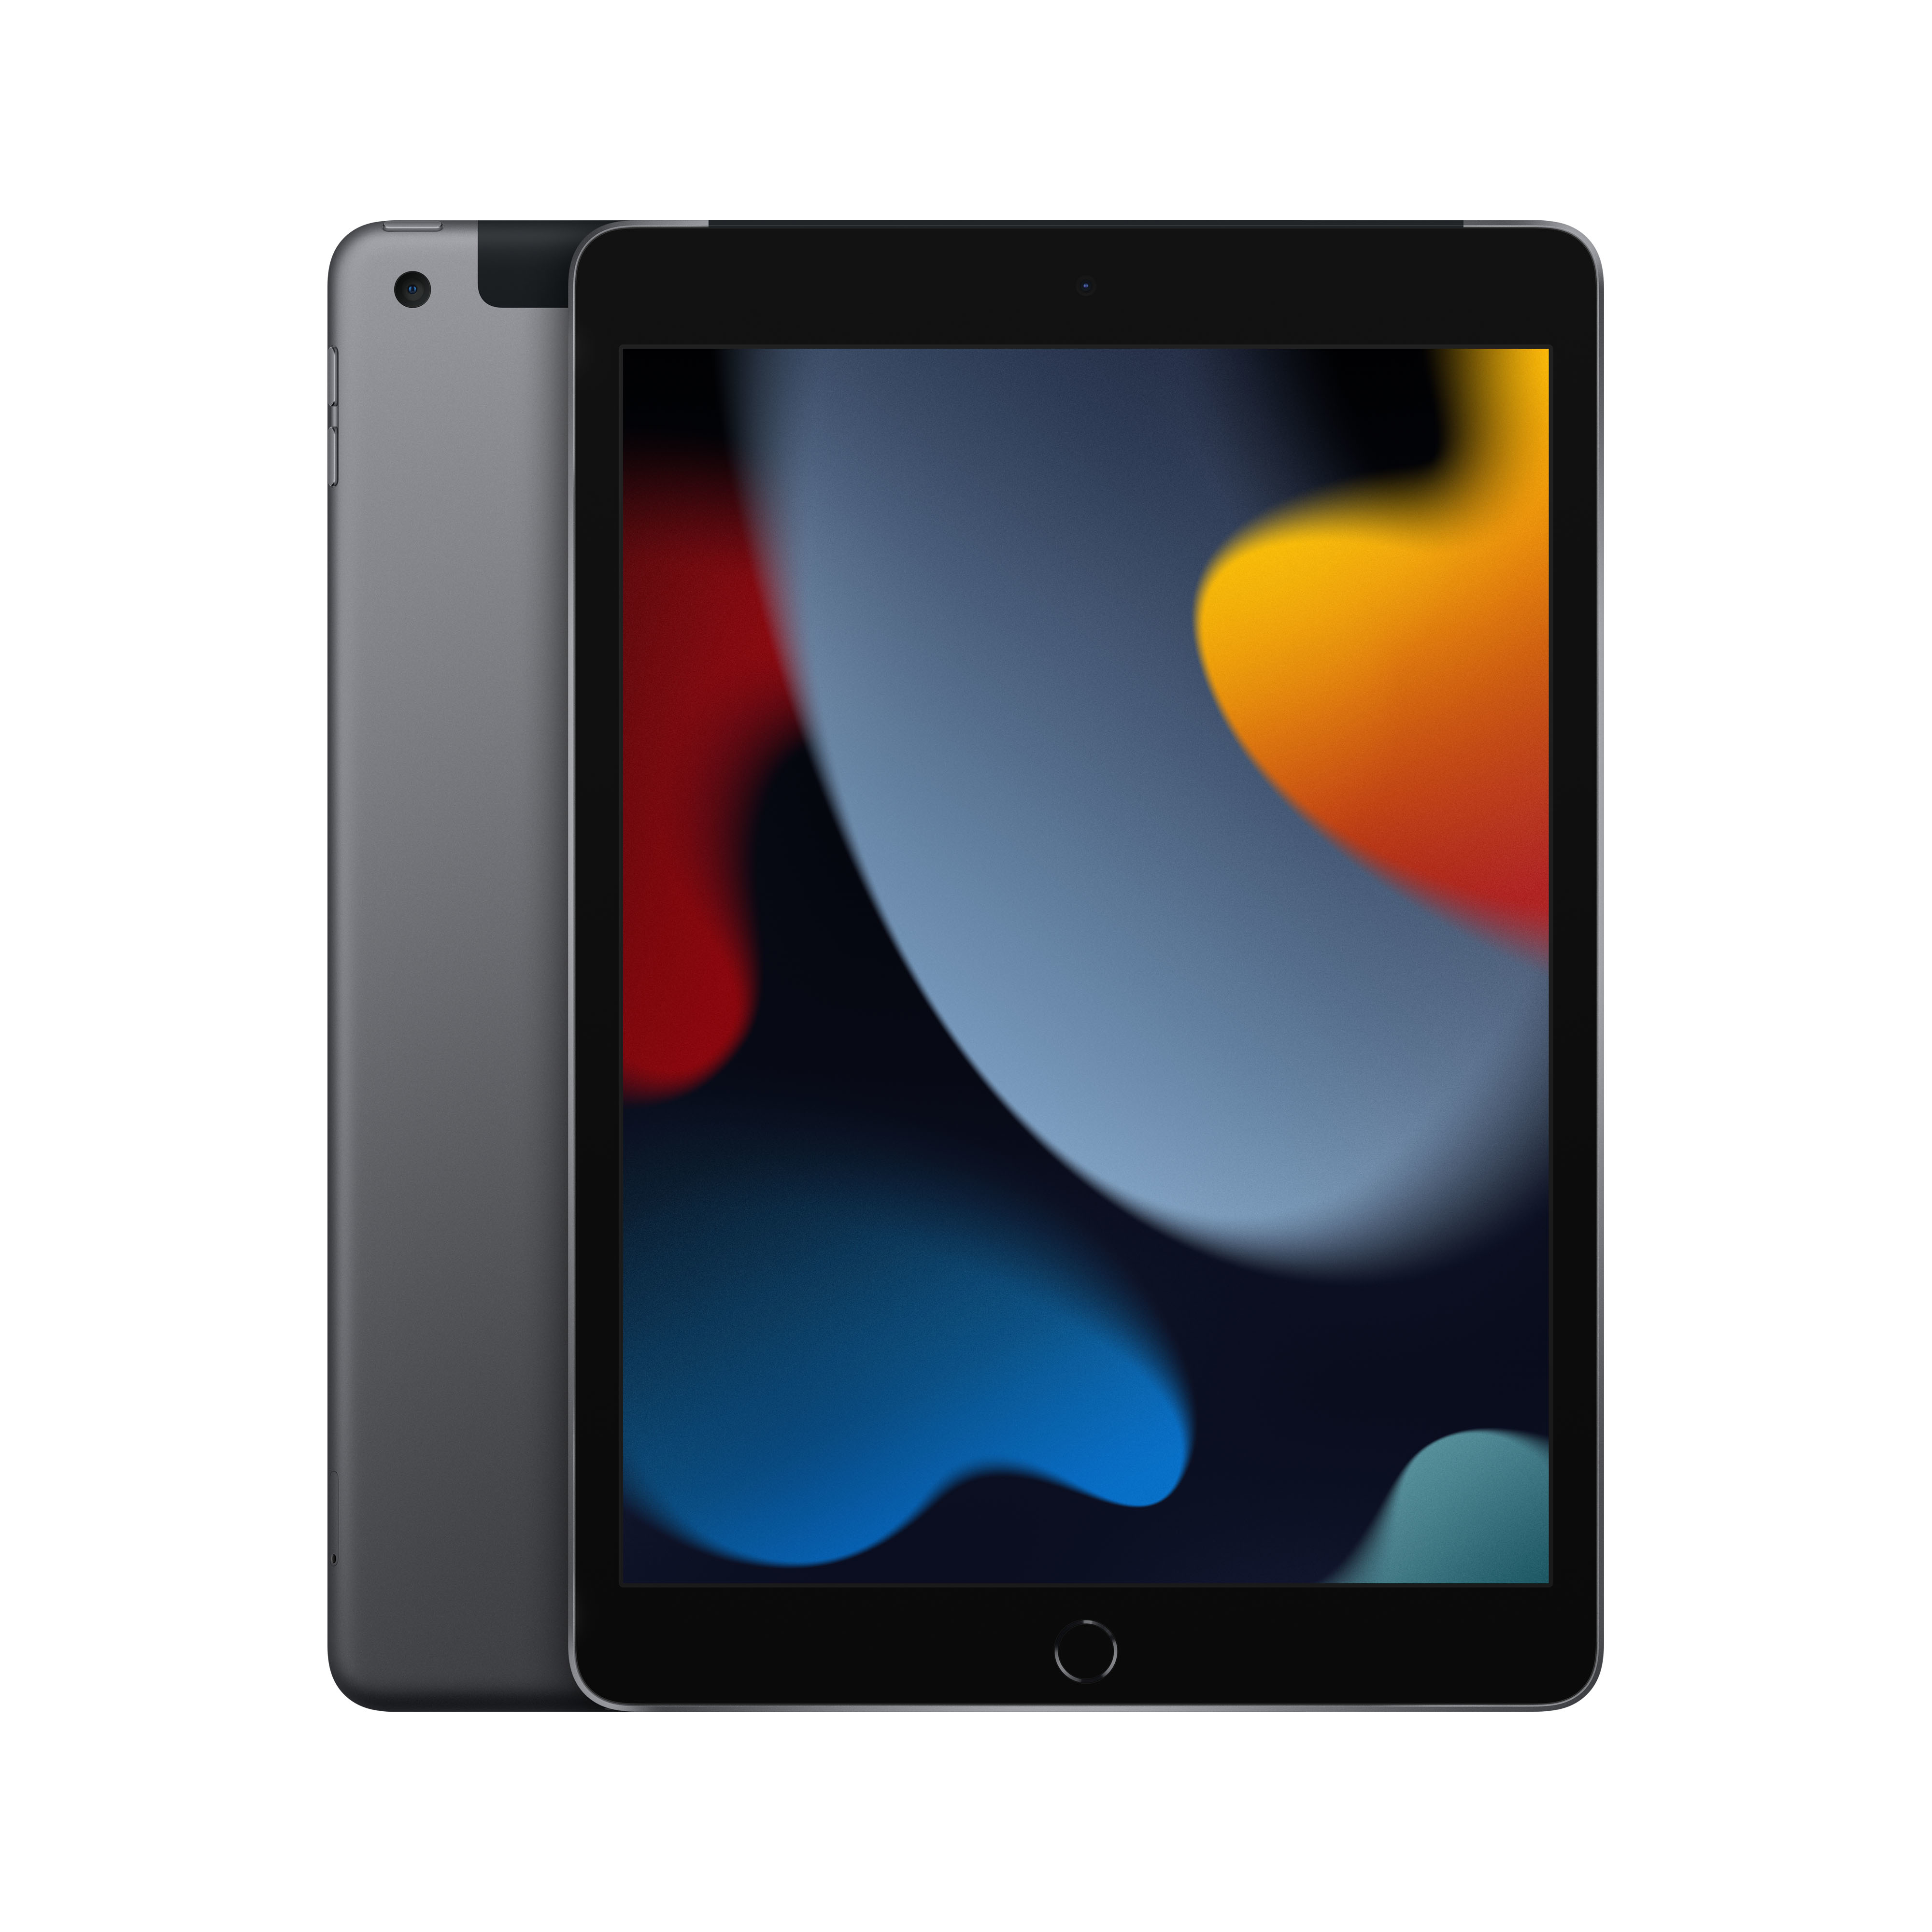 TABLET IPAD 10.2 64GB WIFI-CELL SP ACE GRAY 2021